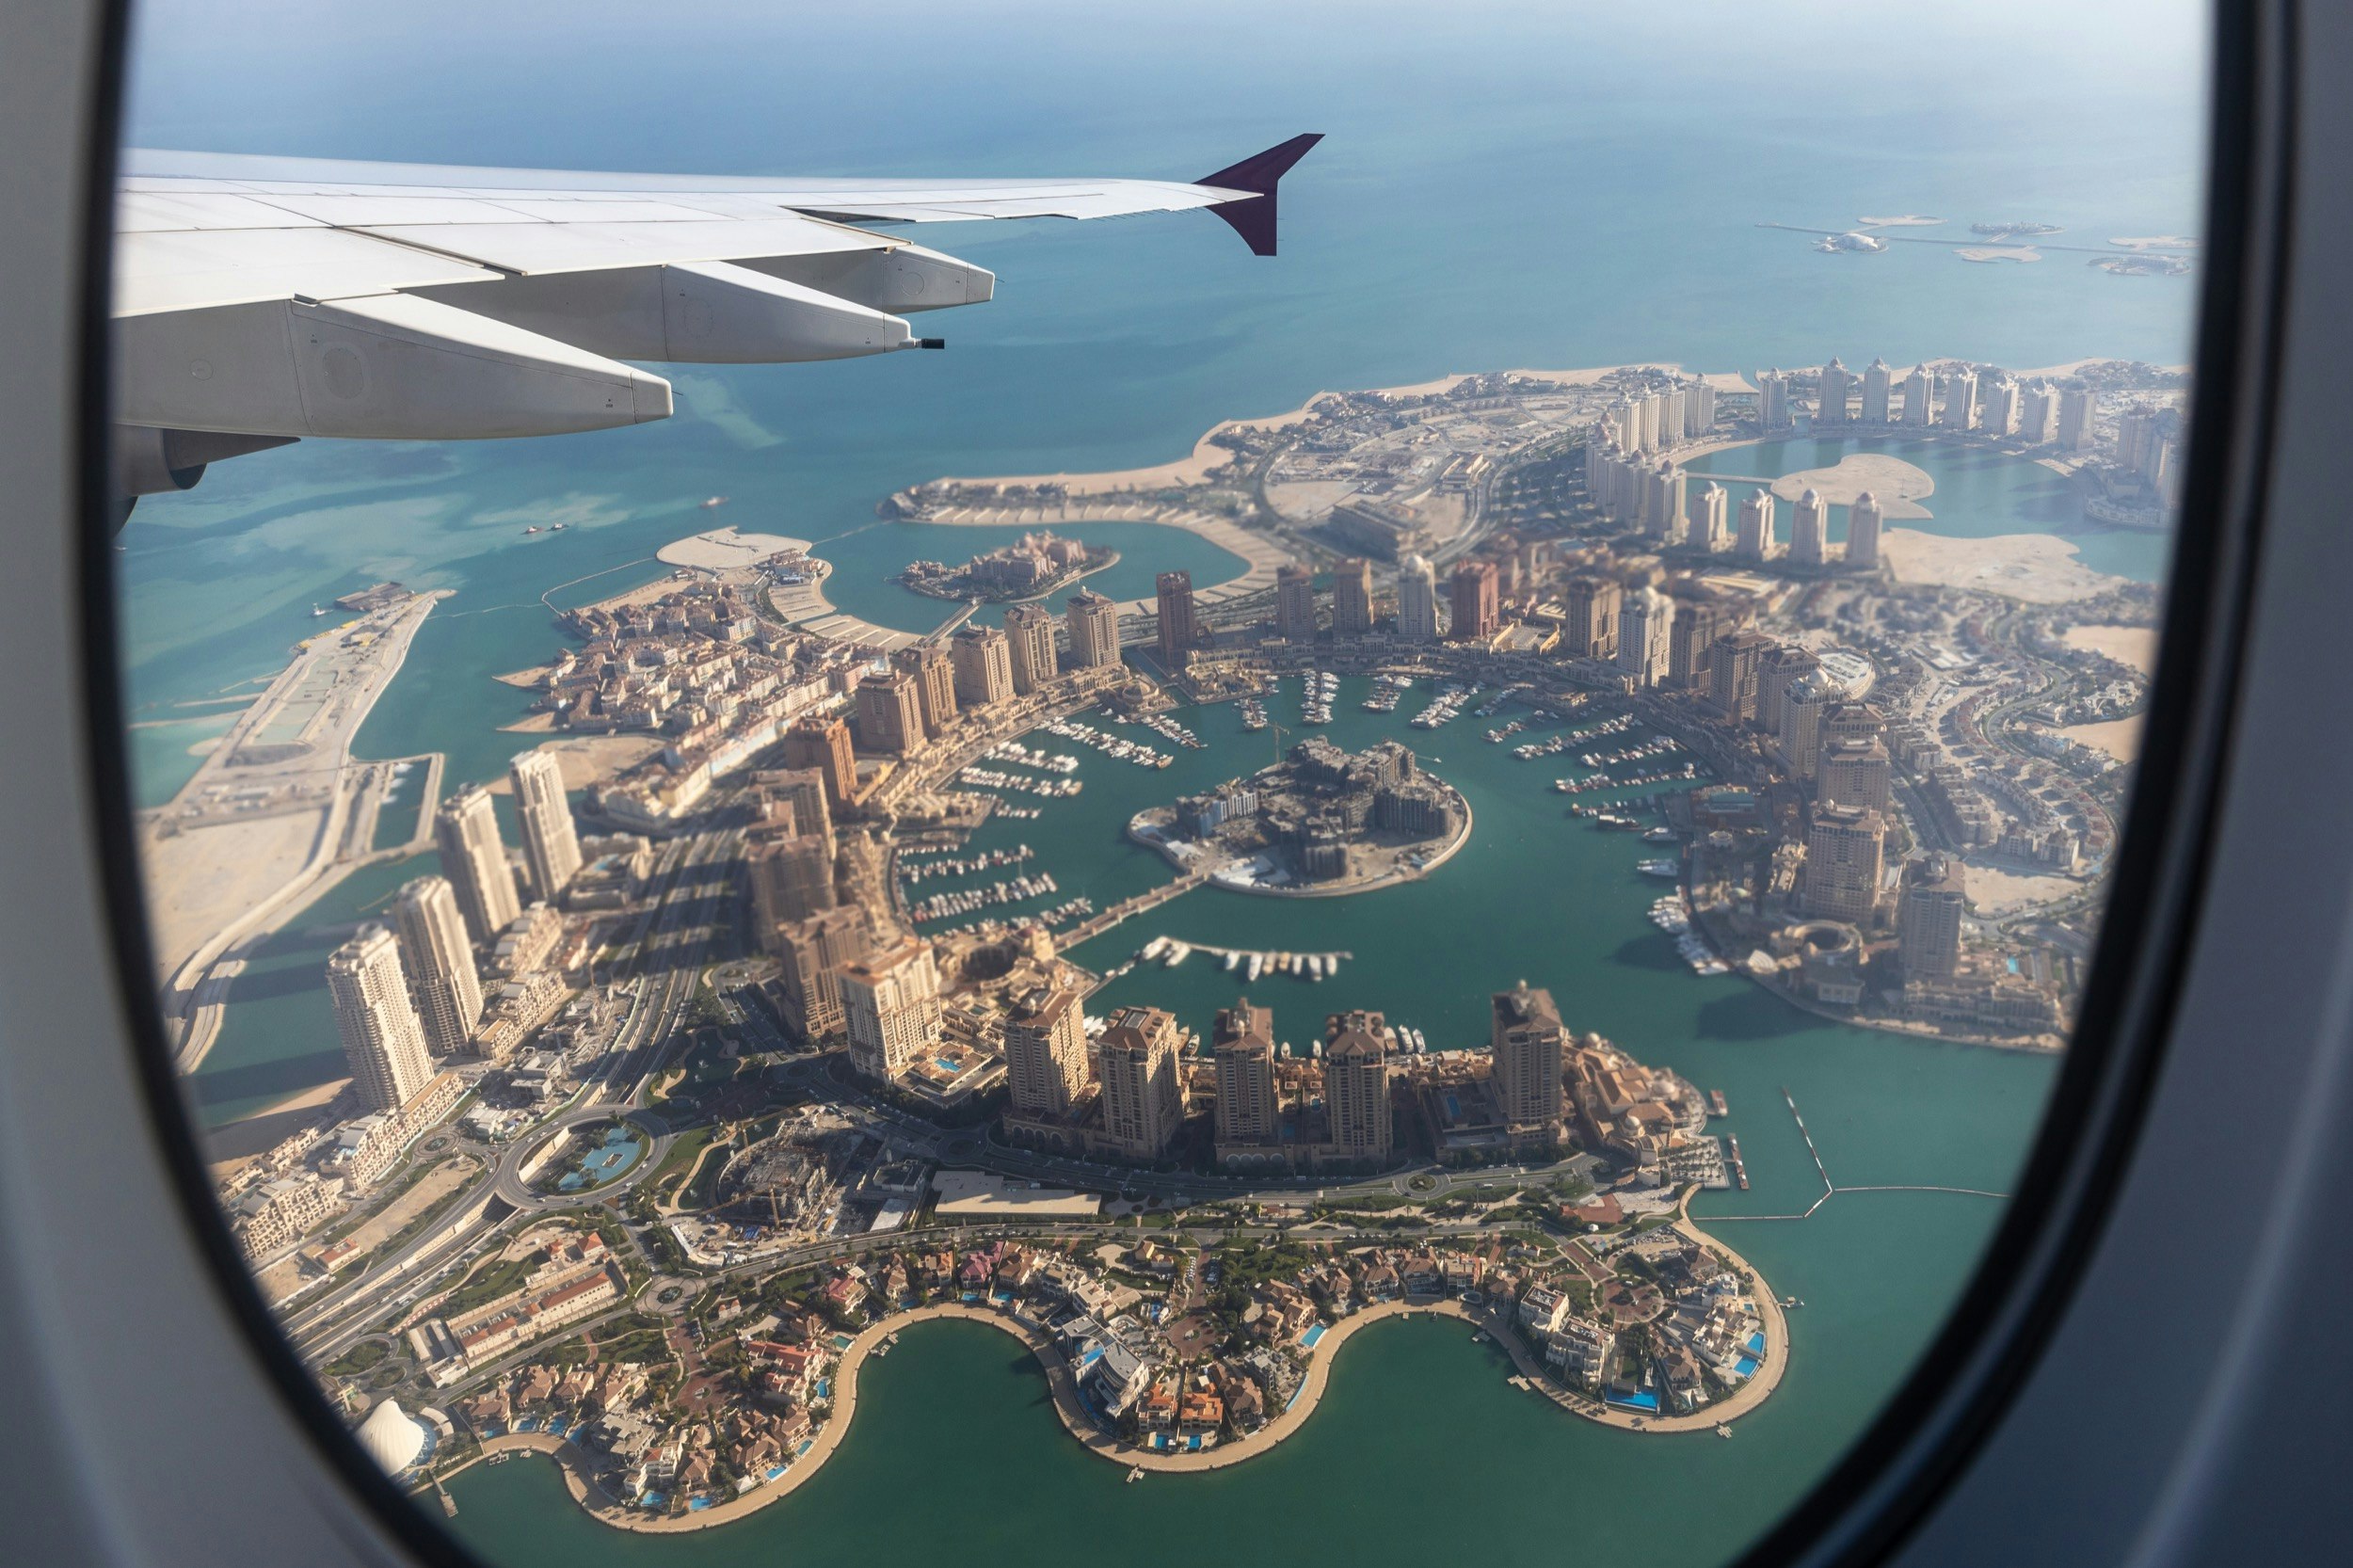 The Skyline of Doha from the window of an airplane